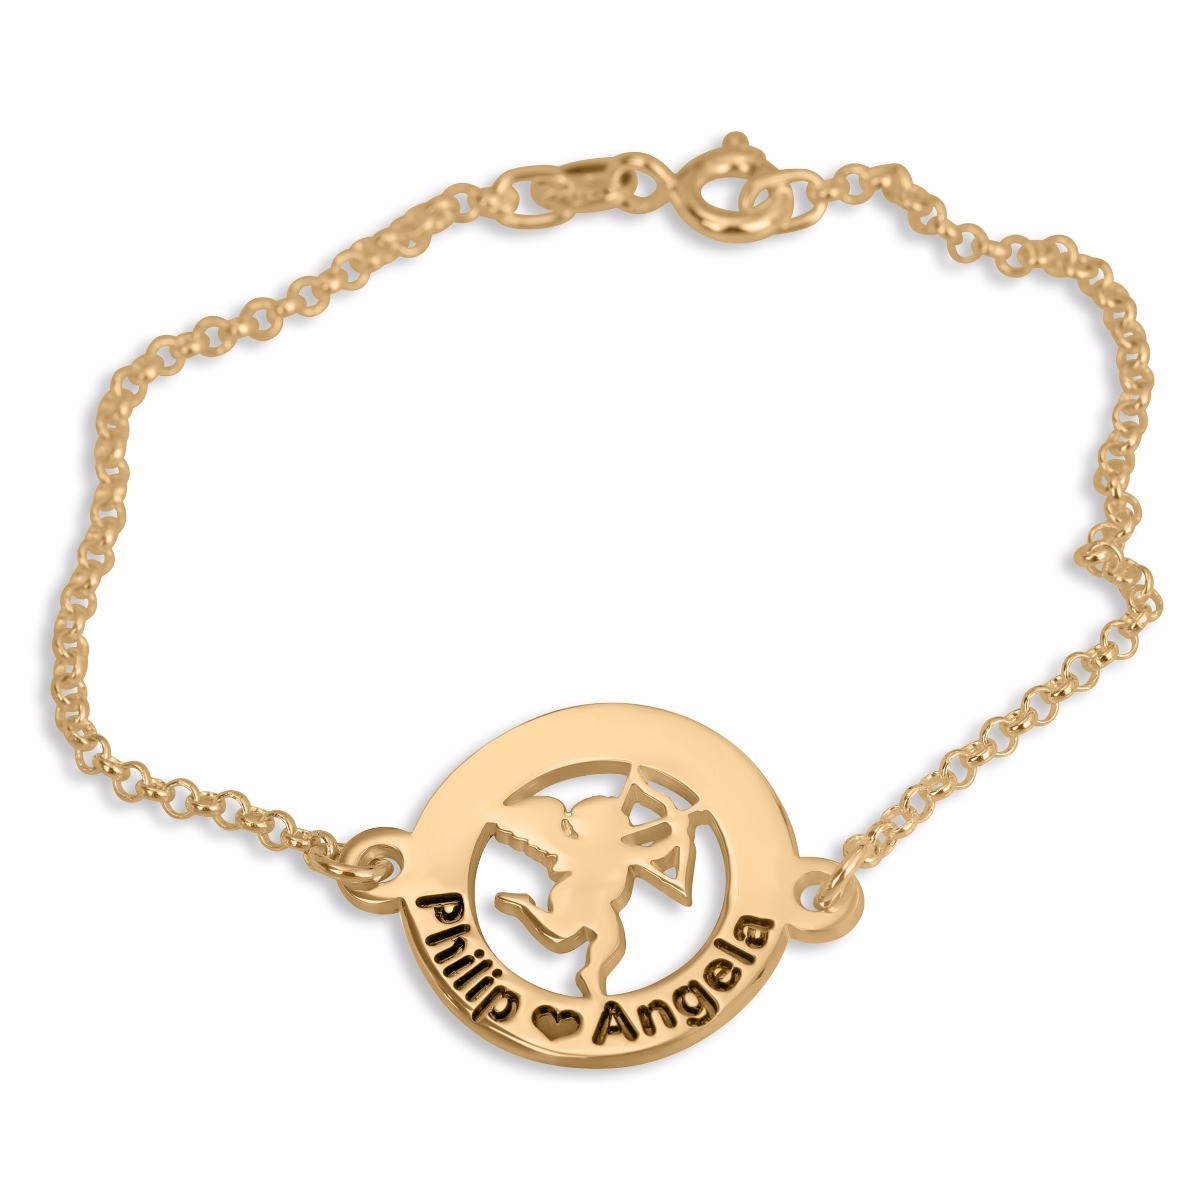 Double Thickness Gold-Plated Cupid Personalized Couples Name Bracelet - 1